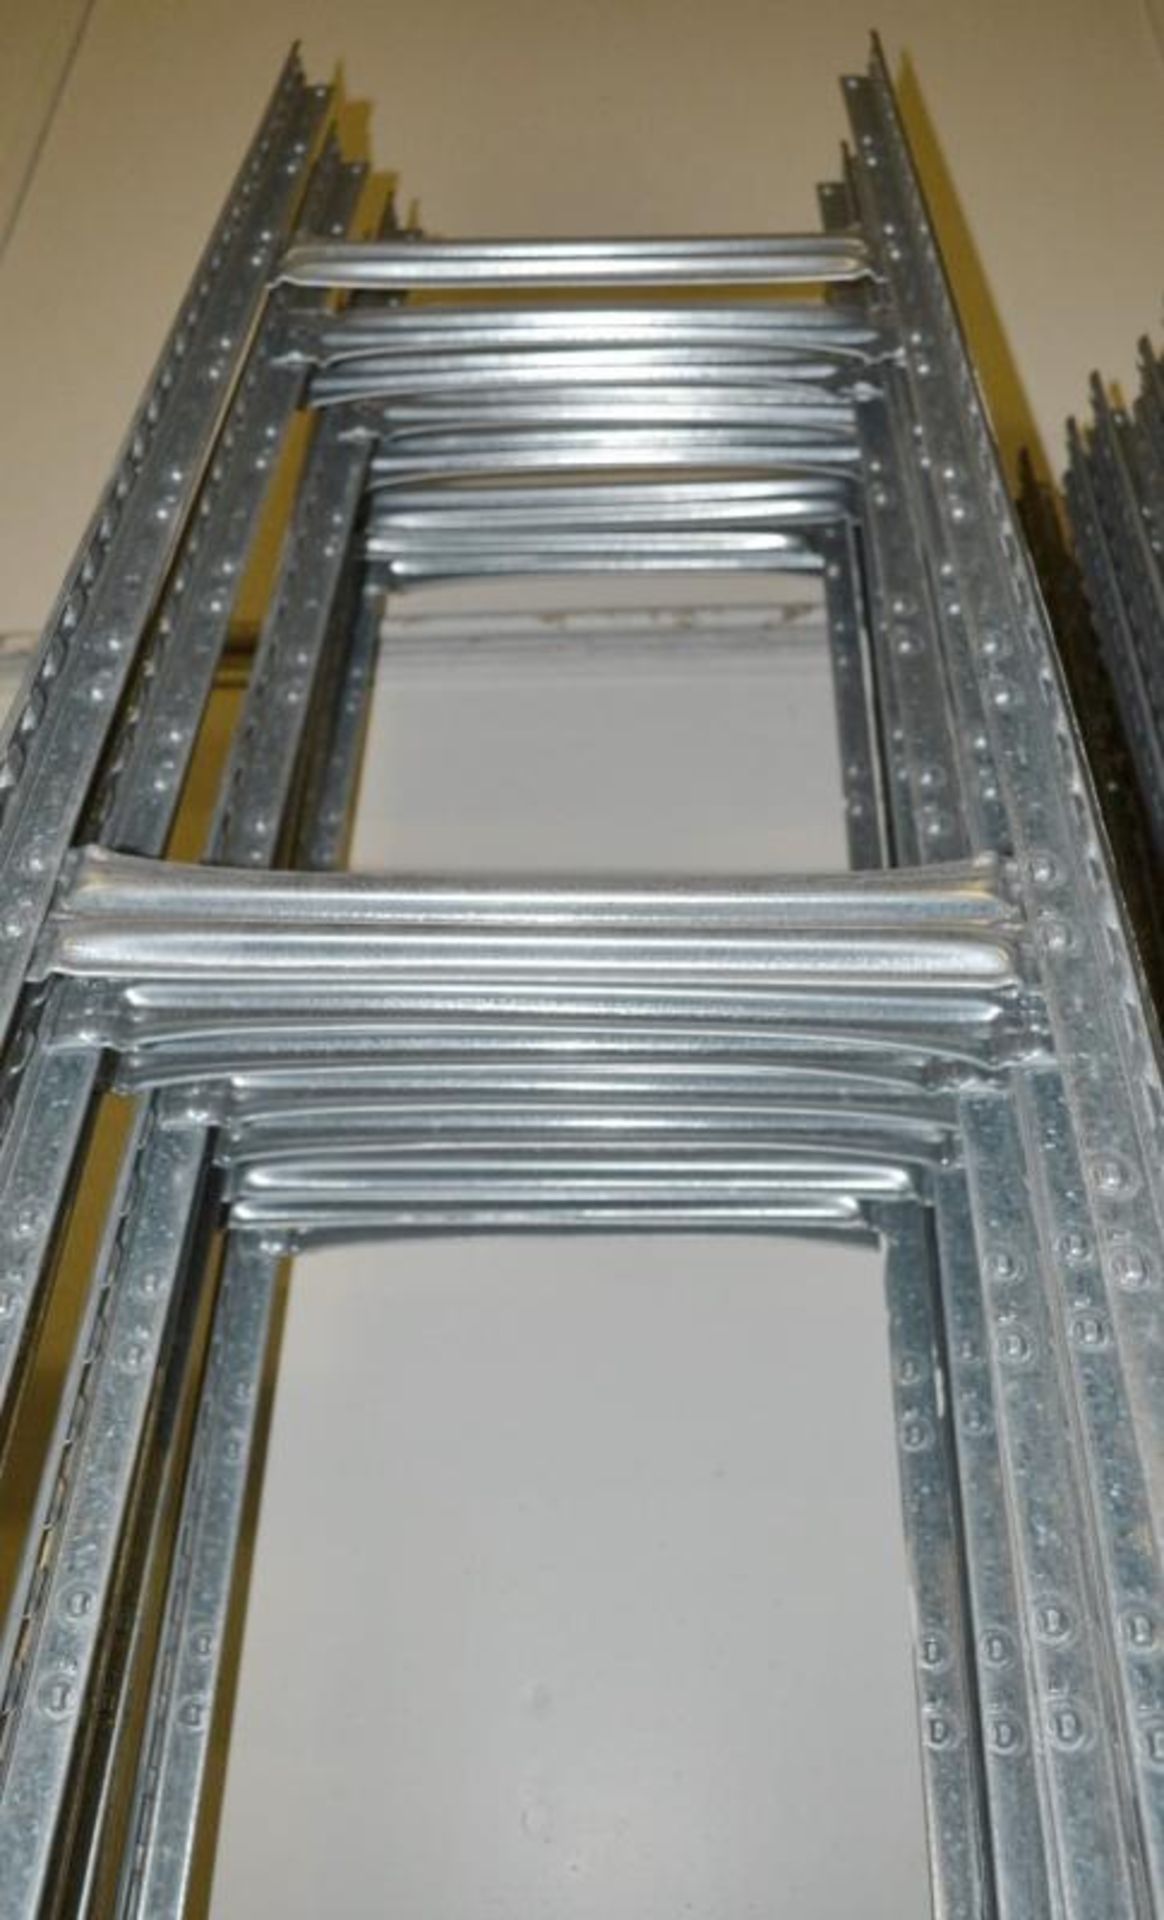 4 x Bays of Metalsistem Steel Modular Storage Shelving - Includes 53 Pieces - Recently Removed - Image 16 of 17